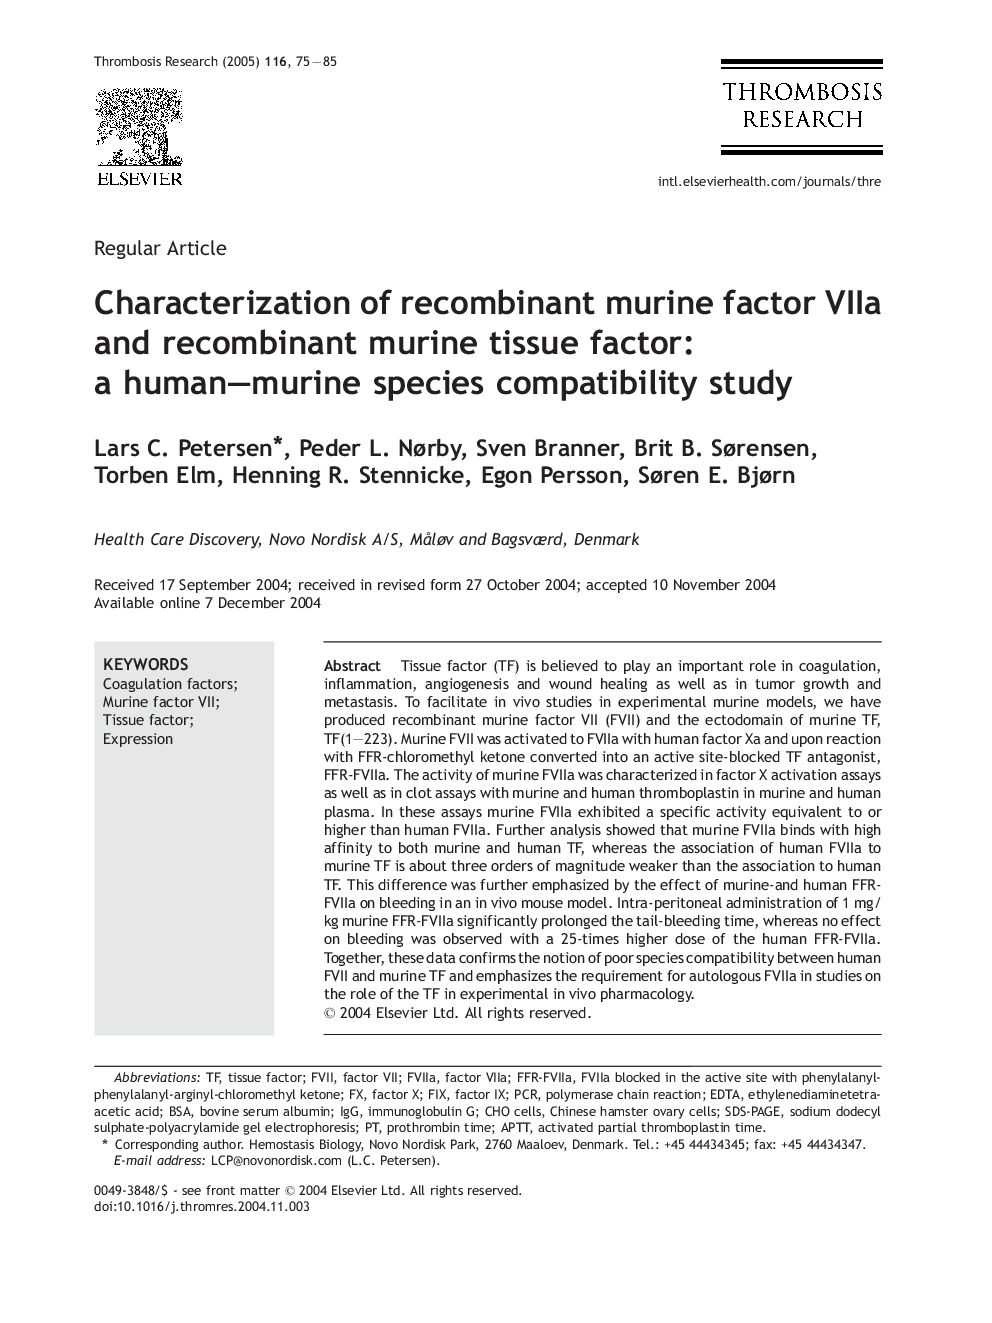 Characterization of recombinant murine factor VIIa and recombinant murine tissue factor: a human-murine species compatibility study